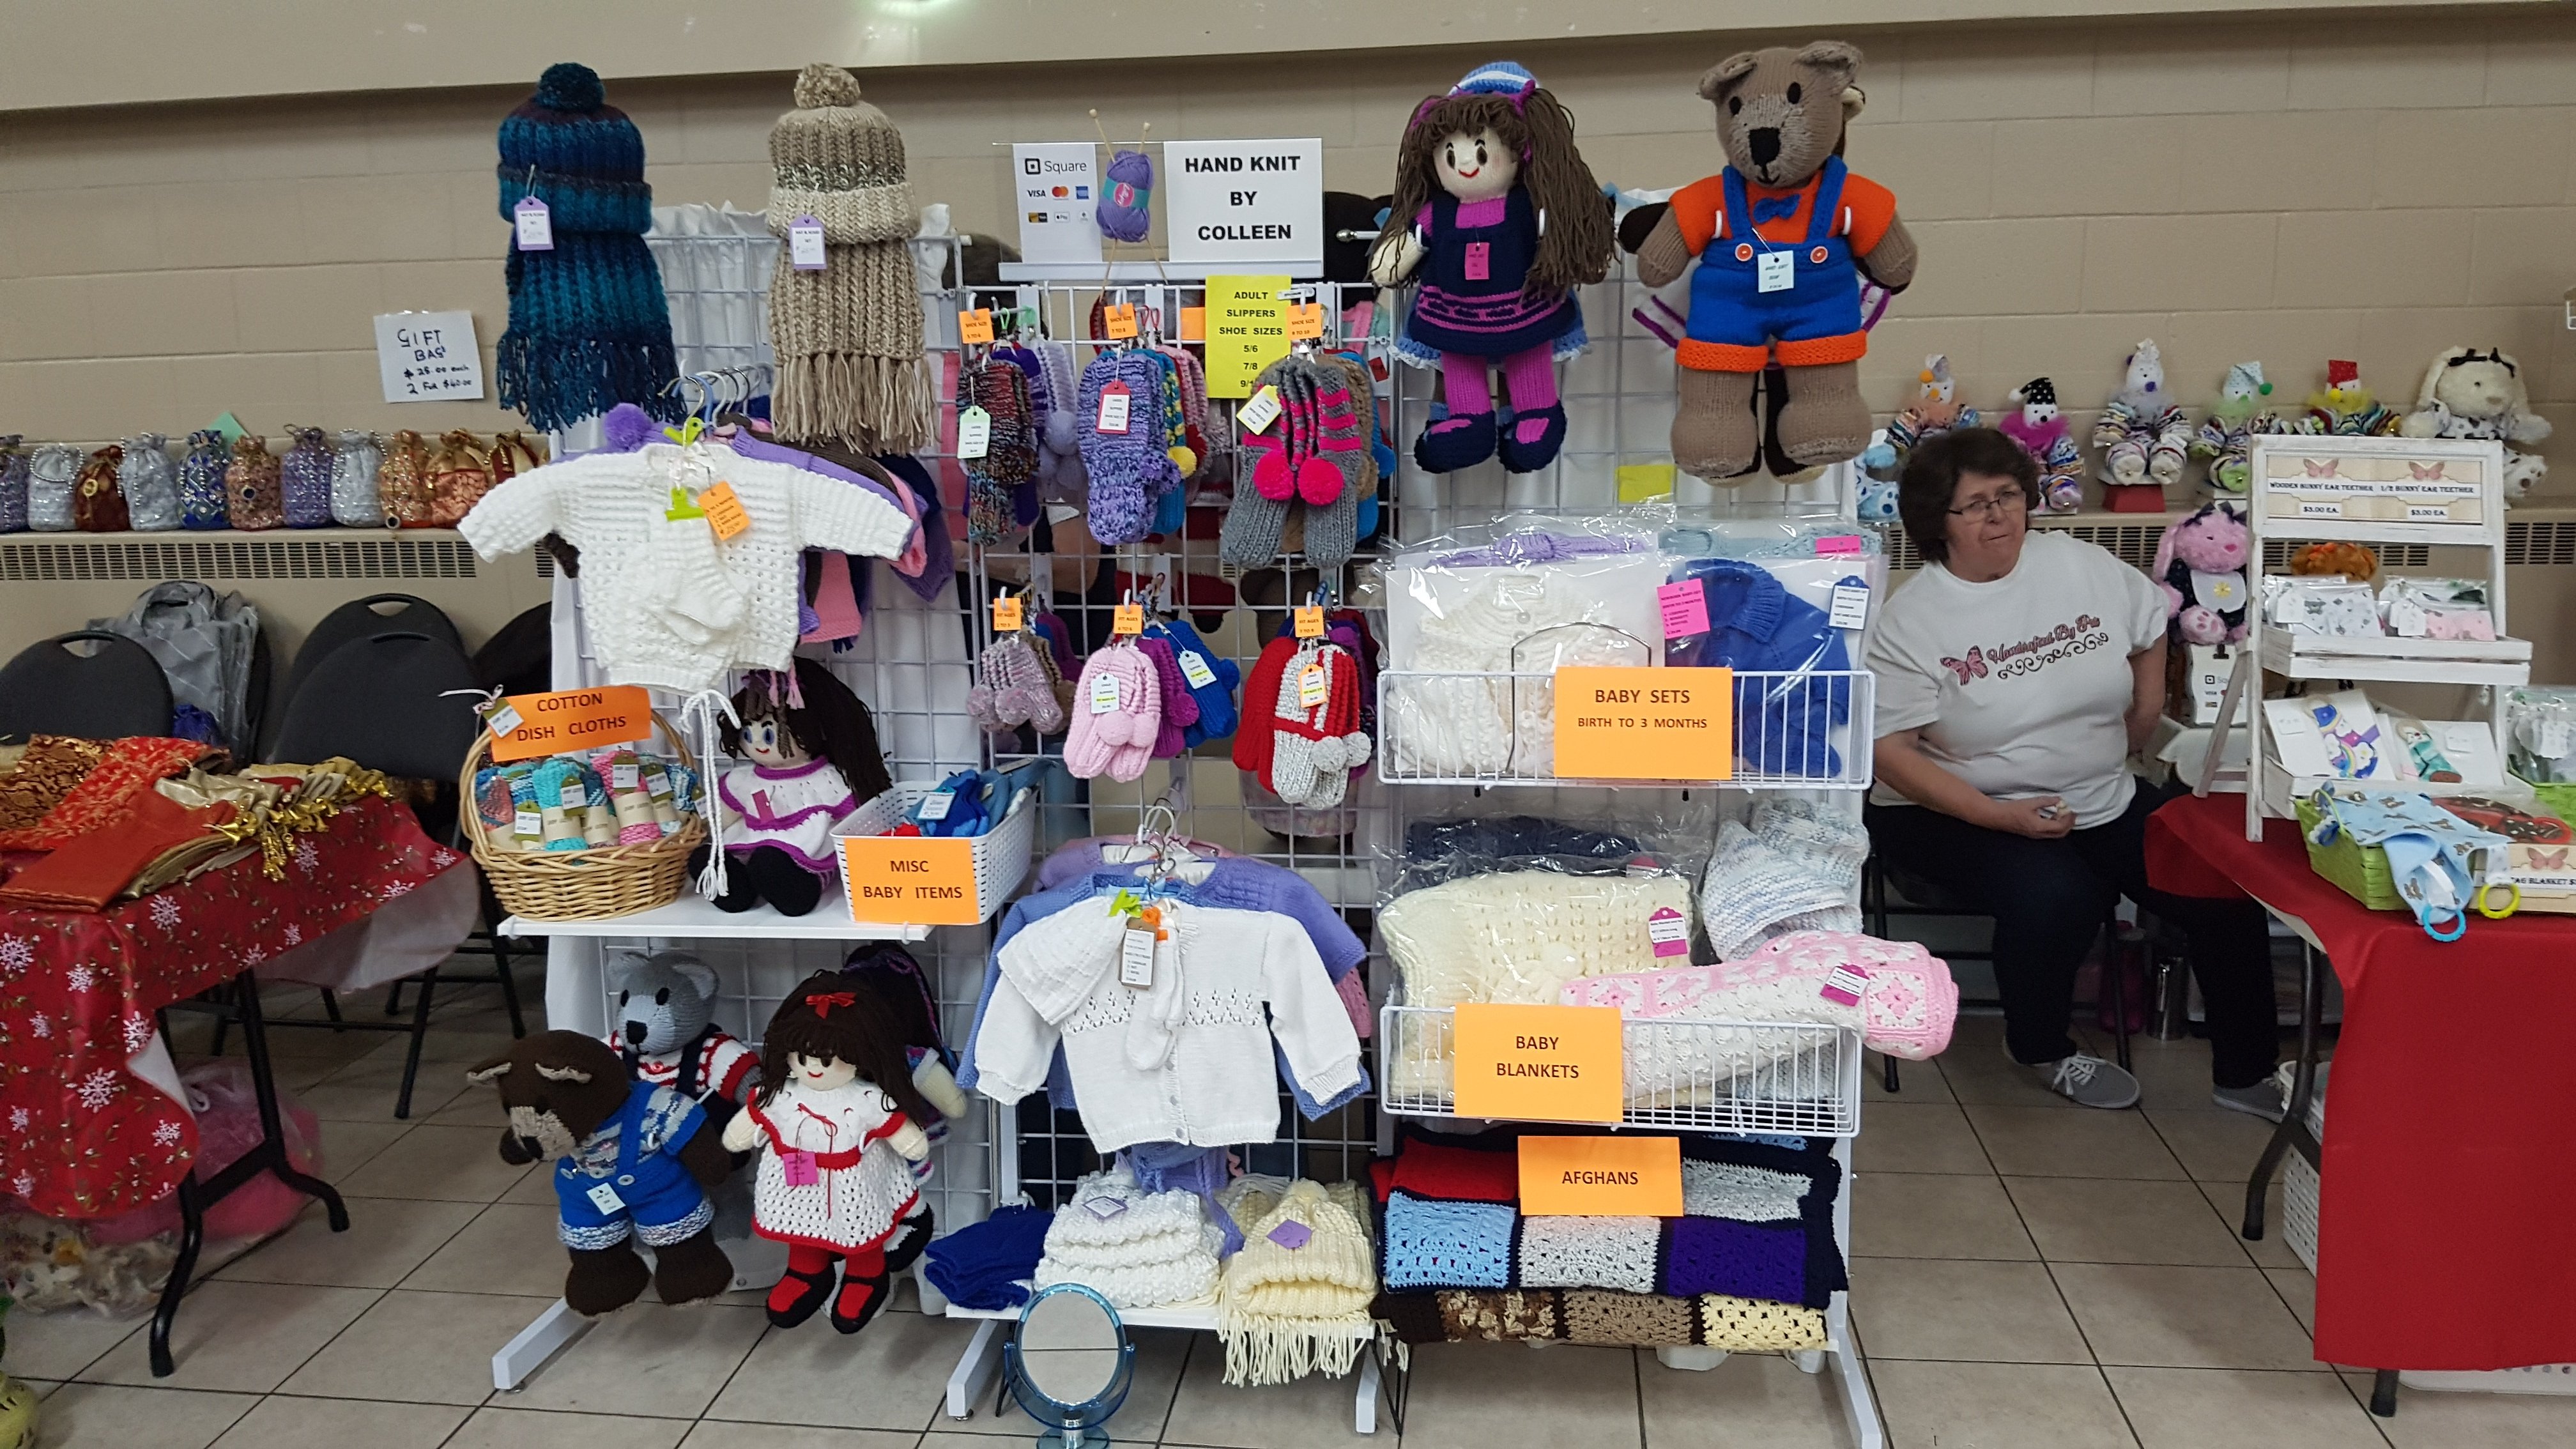 picture of vendor selling knitted items for babies